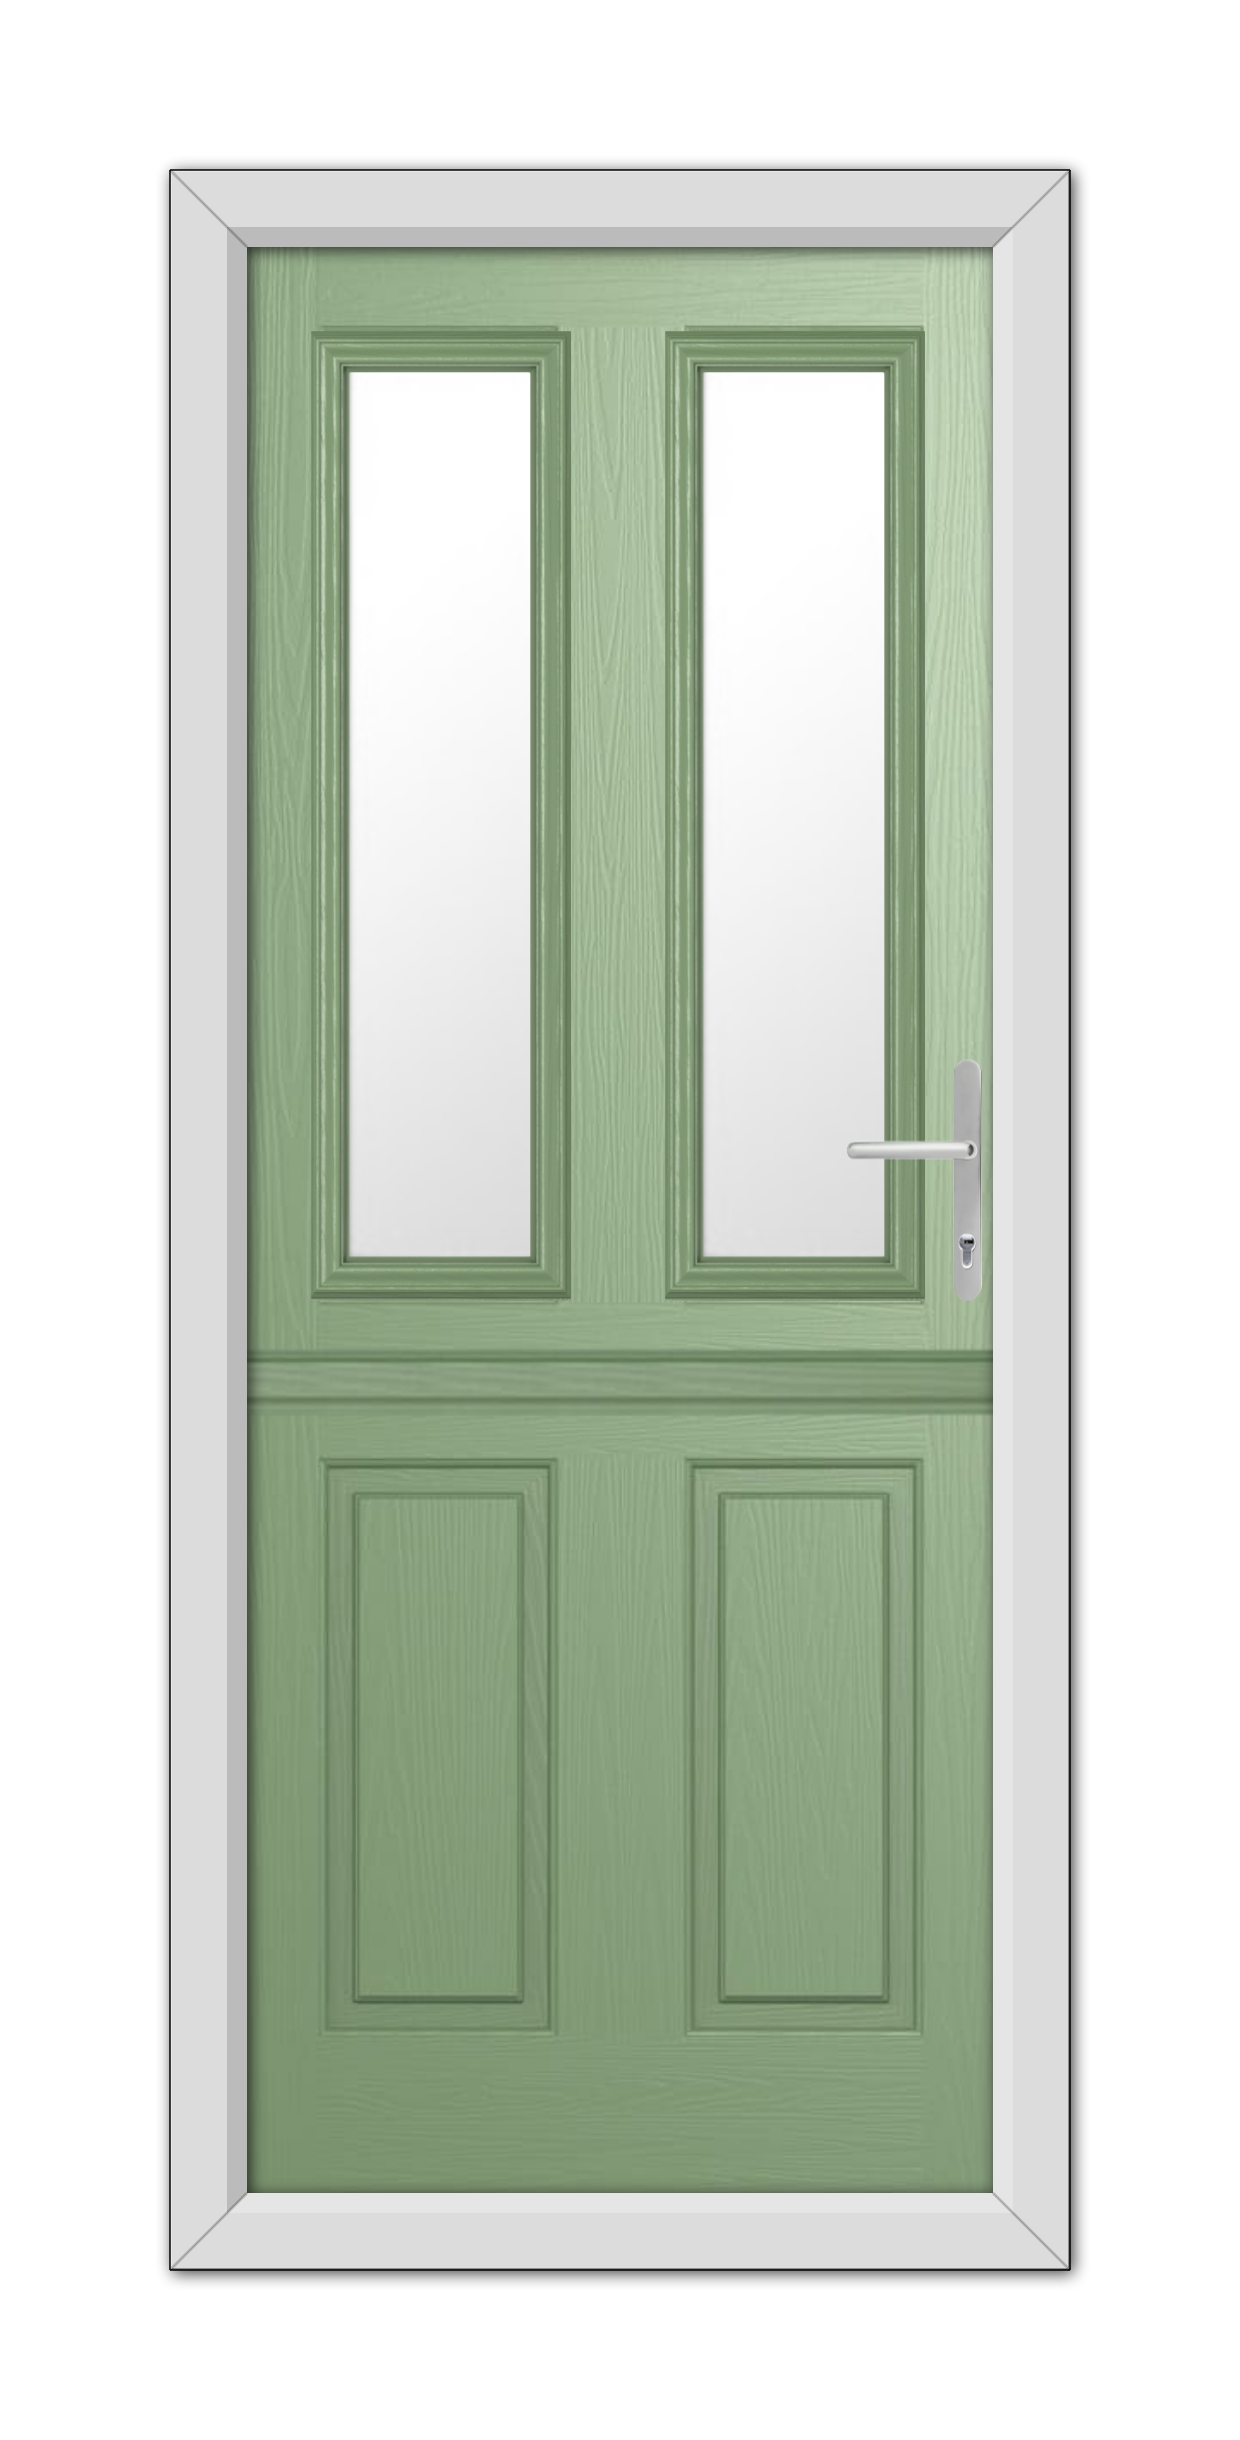 A Chartwell Green Whitmore Stable Composite Door 48mm Timber Core with two upper glass panels and a metallic handle, set within a white frame.